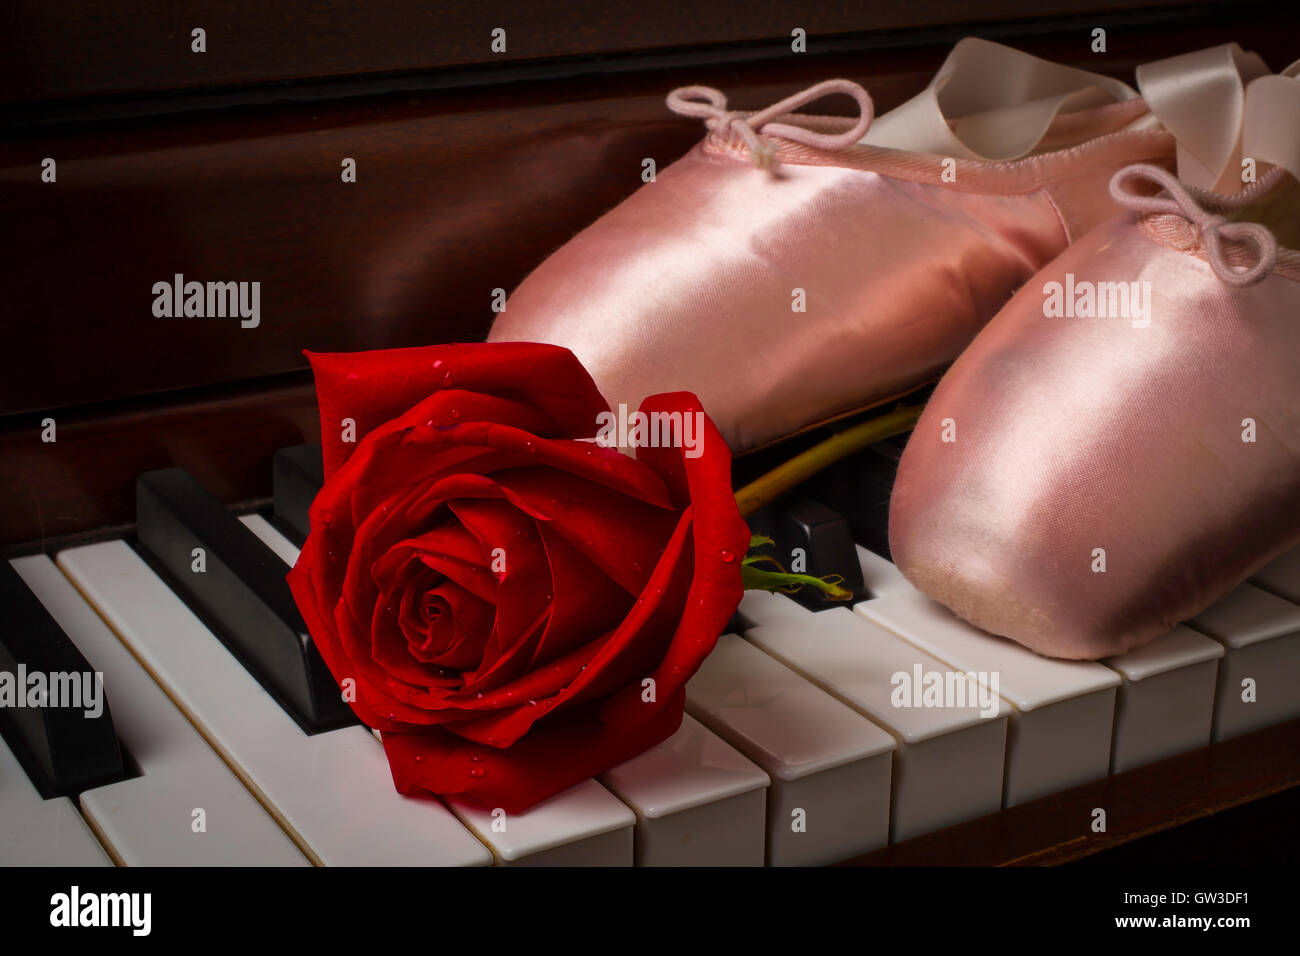 Rose And Ballet Shoes On Piano Stock Photo